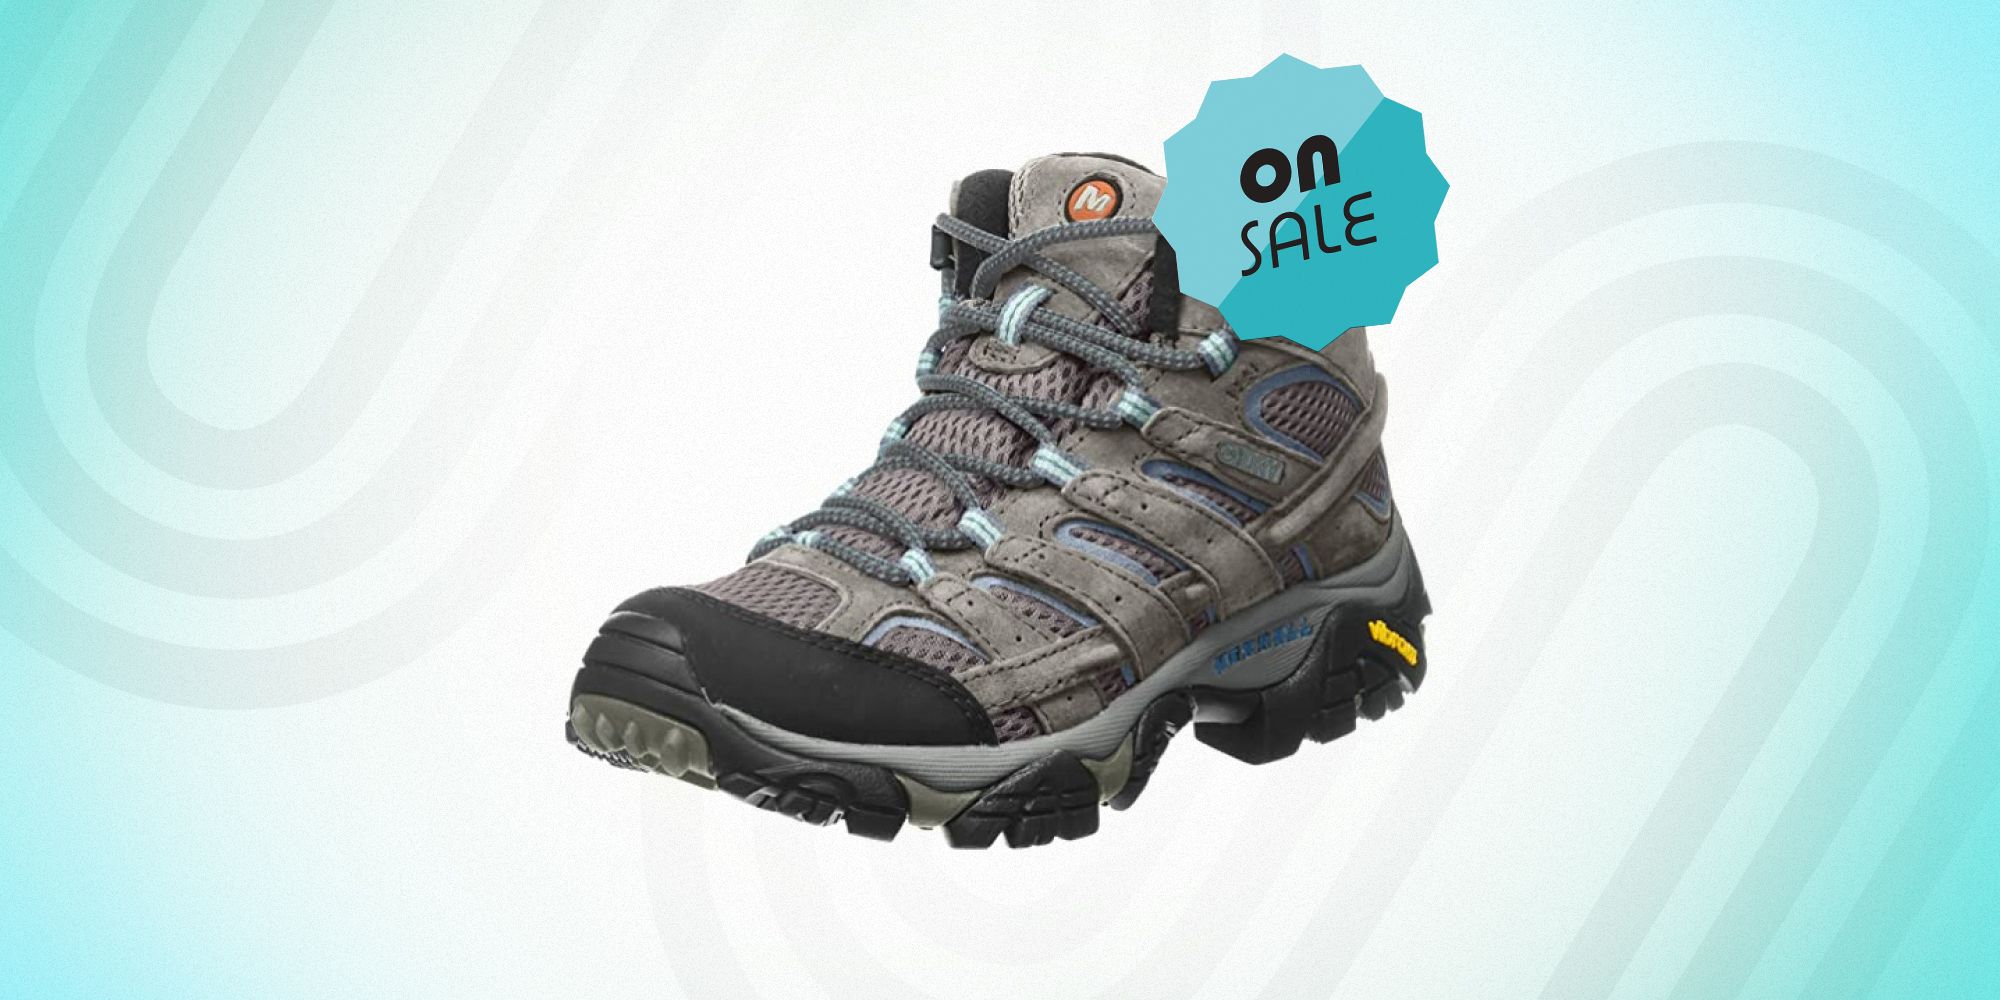 Save on These 6 Great Hiking Boots on Sale at Amazon Now